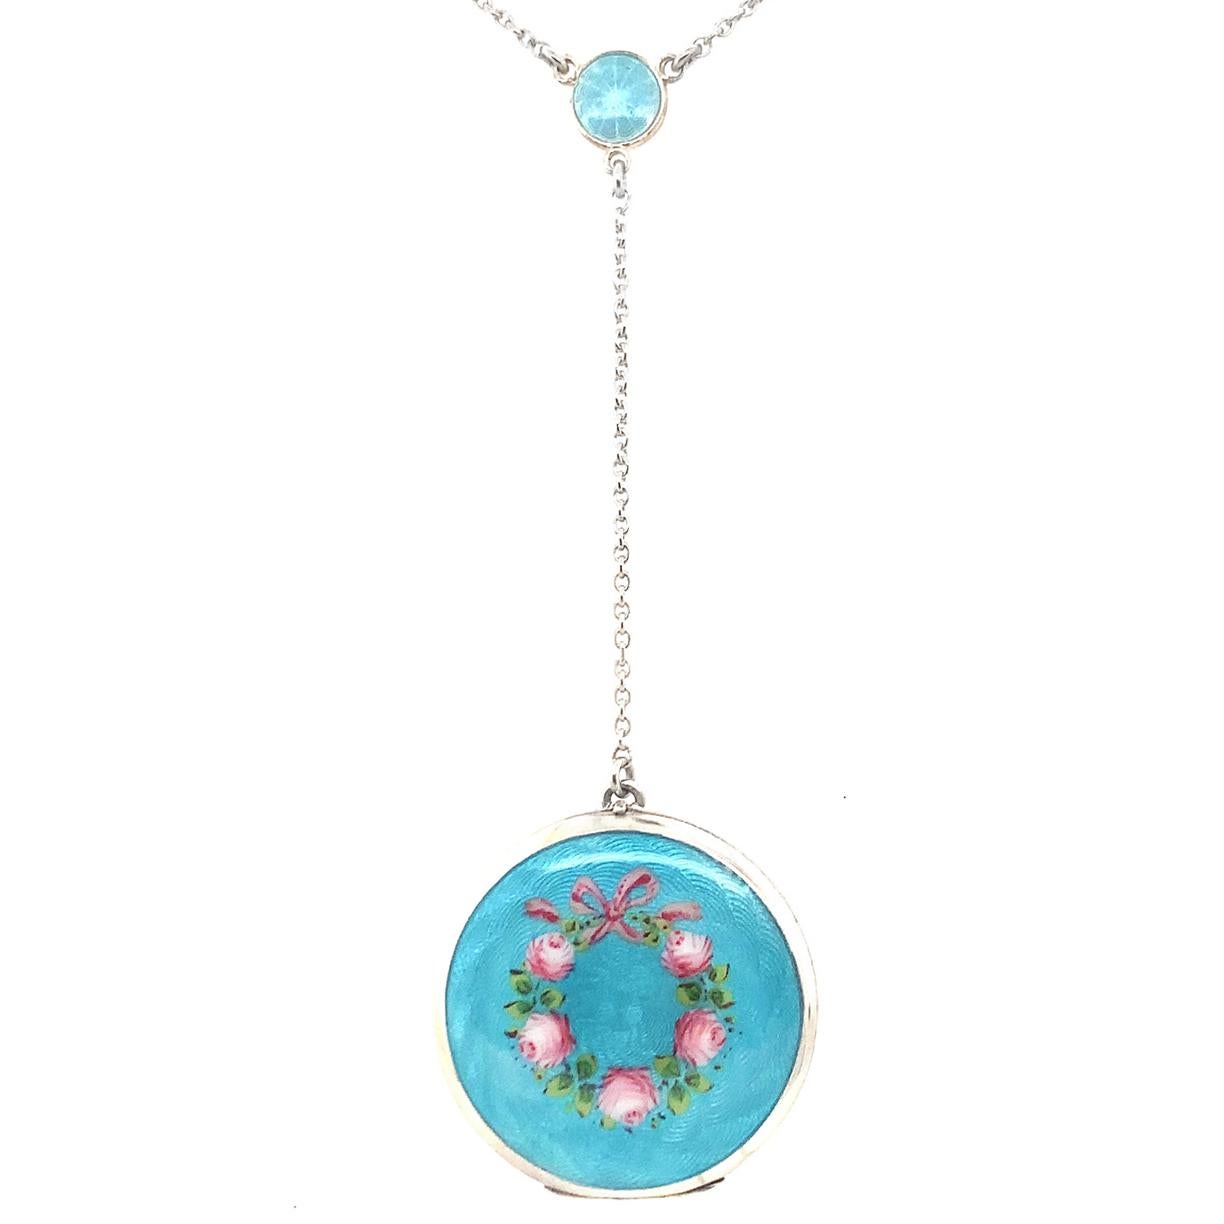 Absolutely beautiful sterling silver locket and original chain.  The round locket opens to reveal space for two pictures; original bezels are intact.  The locket is a rich turquoise guilloche enamel, embellished with a circle of pink roses.   The